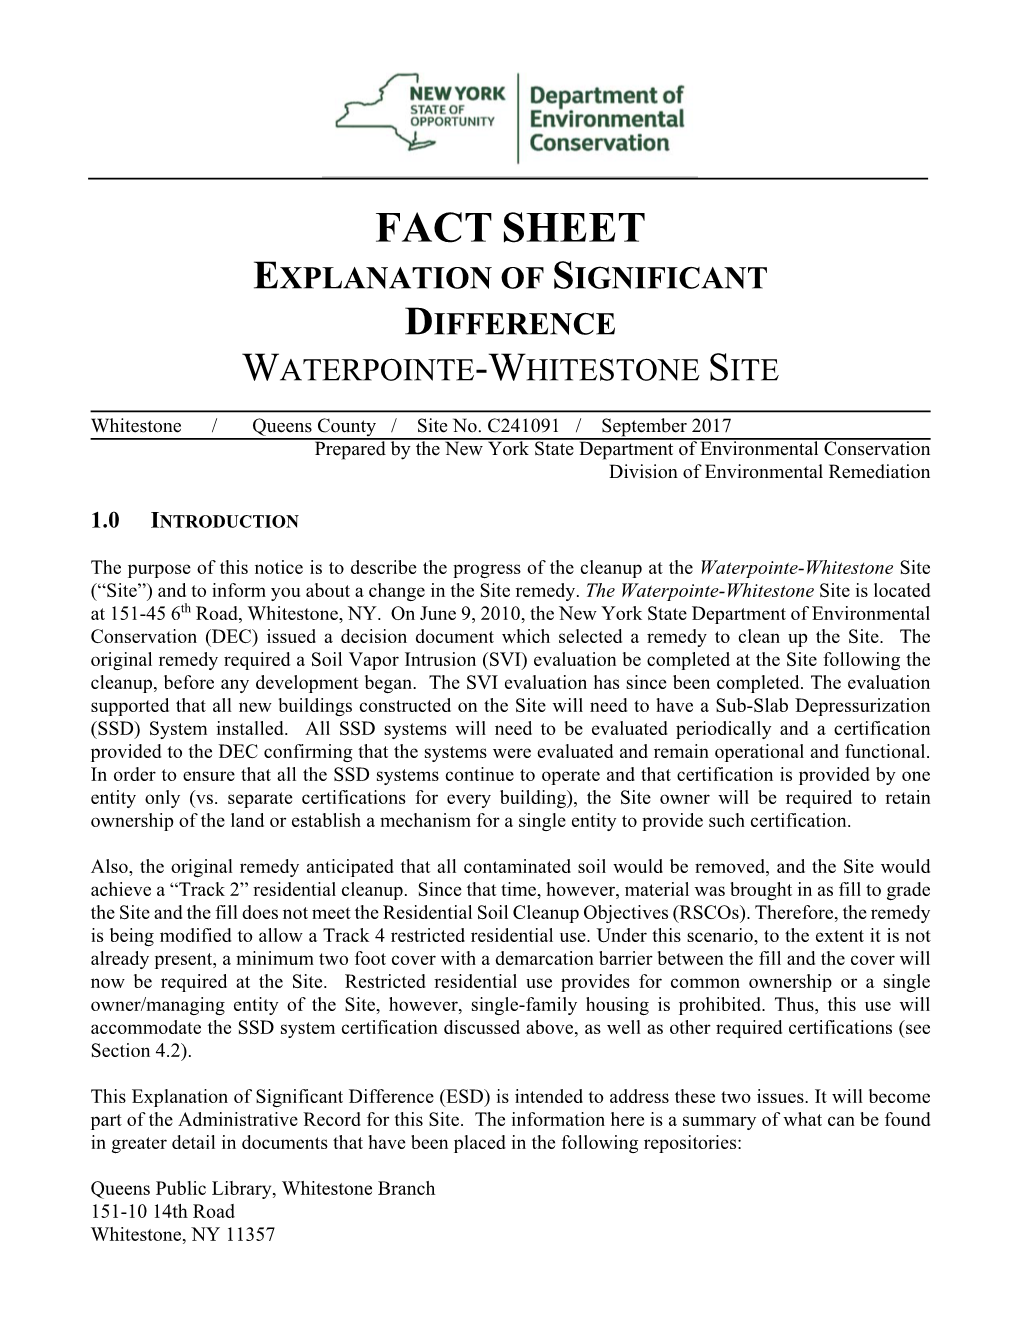 Explanation of Significant Difference Waterpointe-Whitestone Site